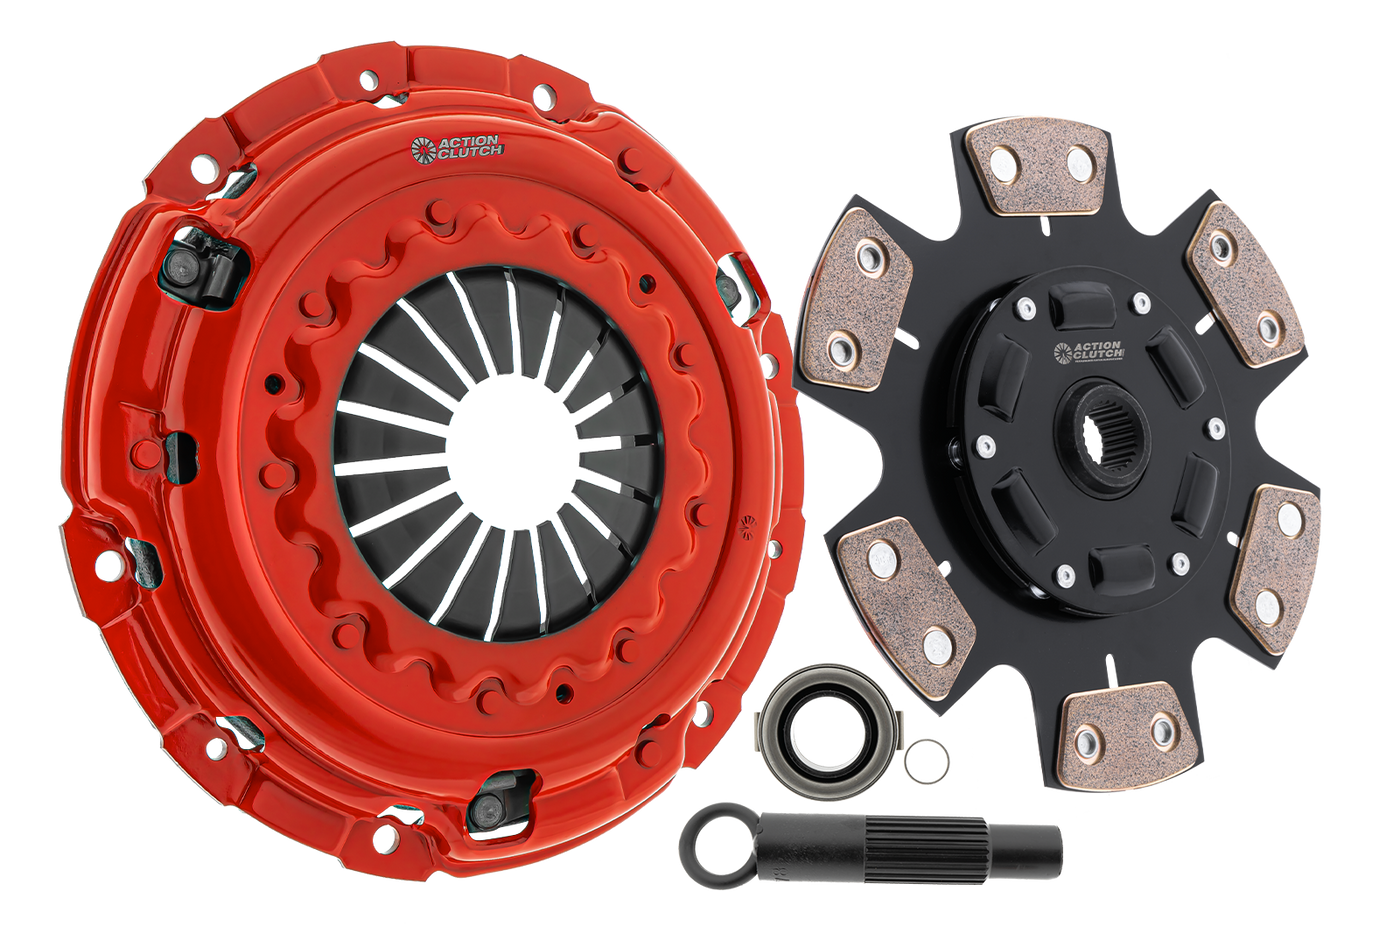 Stage 3 Clutch Kit (1MS) for Toyota 4Runner 1989-1992 2.4L SOHC (22R, 22RE) RWD/4WD RWD/4WD